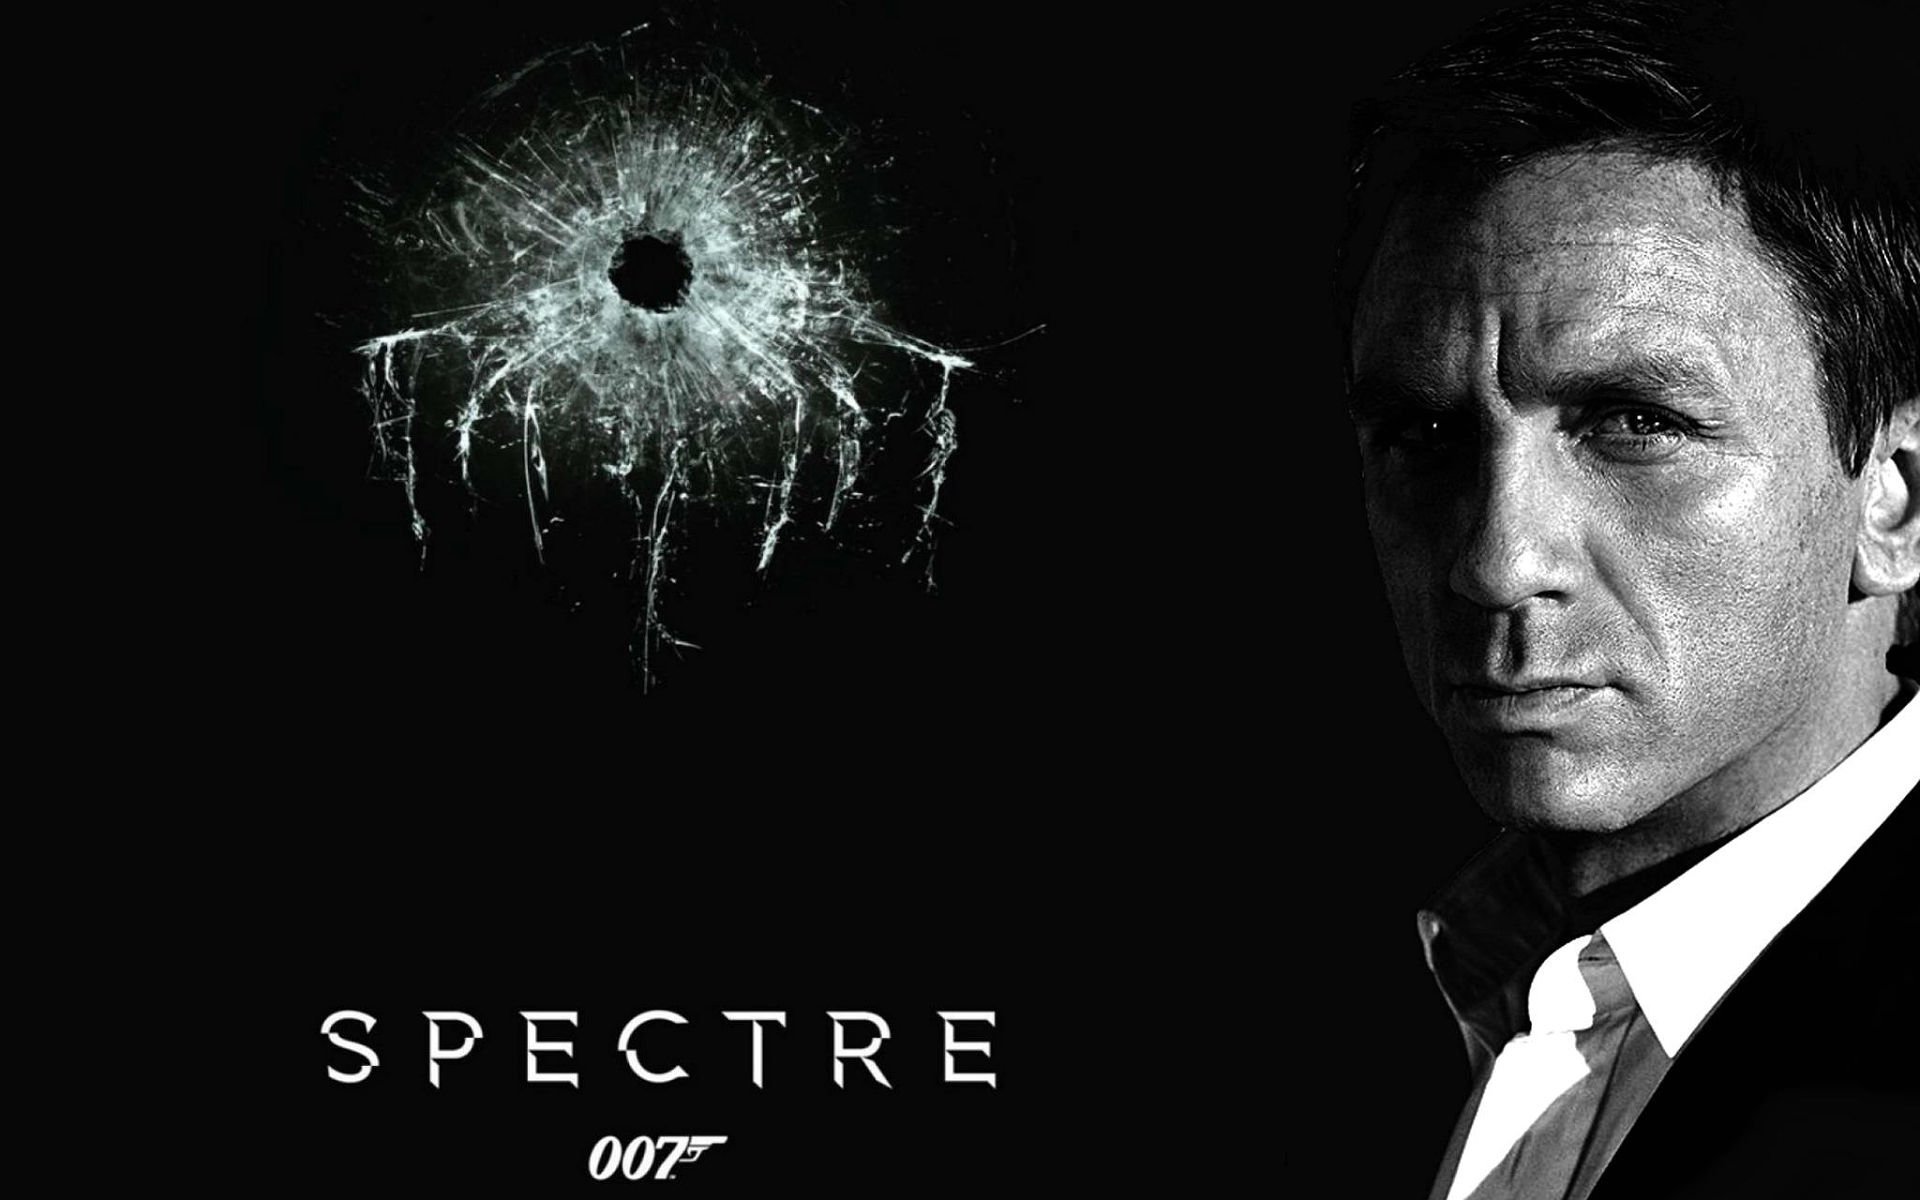 Spectre HD Wallpaper Background Of Your Choice